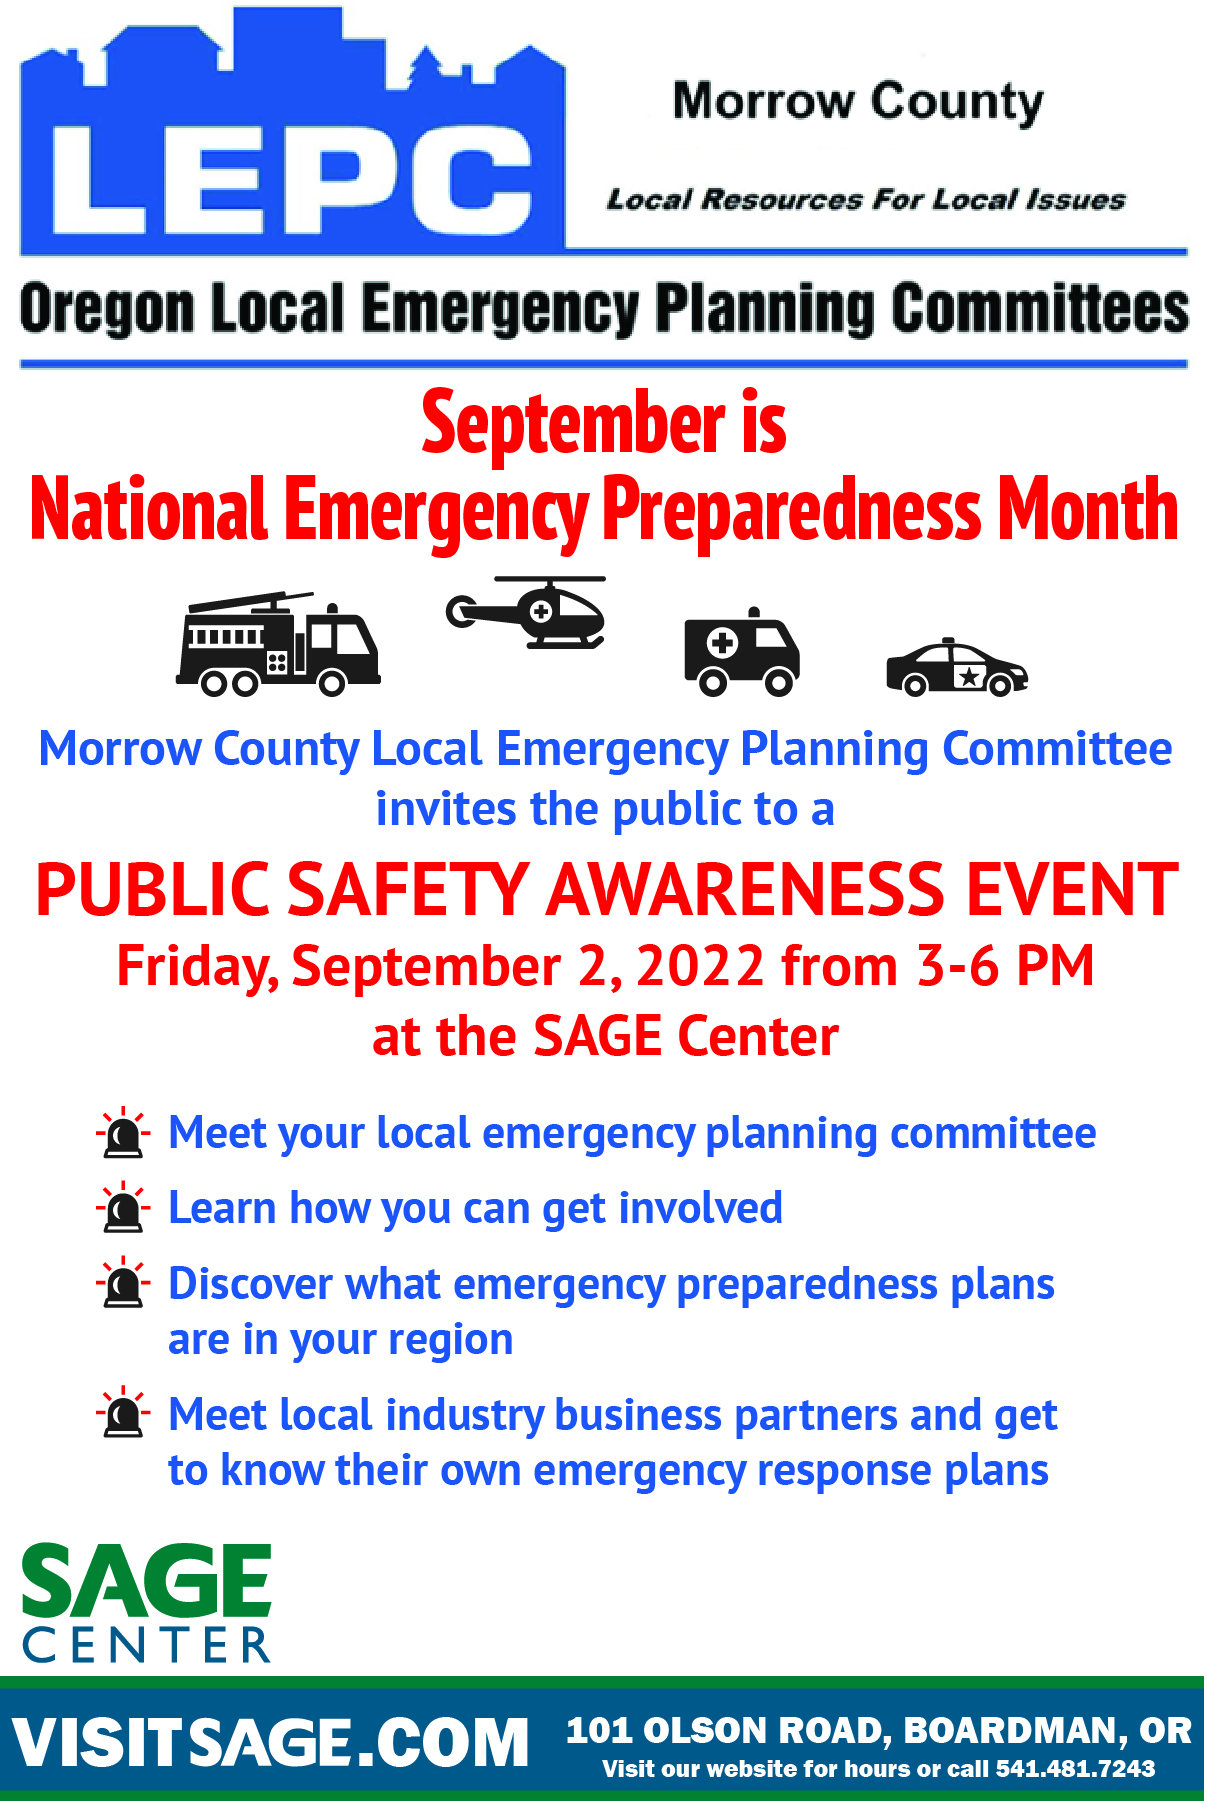 Public Safety Awareness Event, September 2, 2022 from 3-6 PM at the SAGE Center